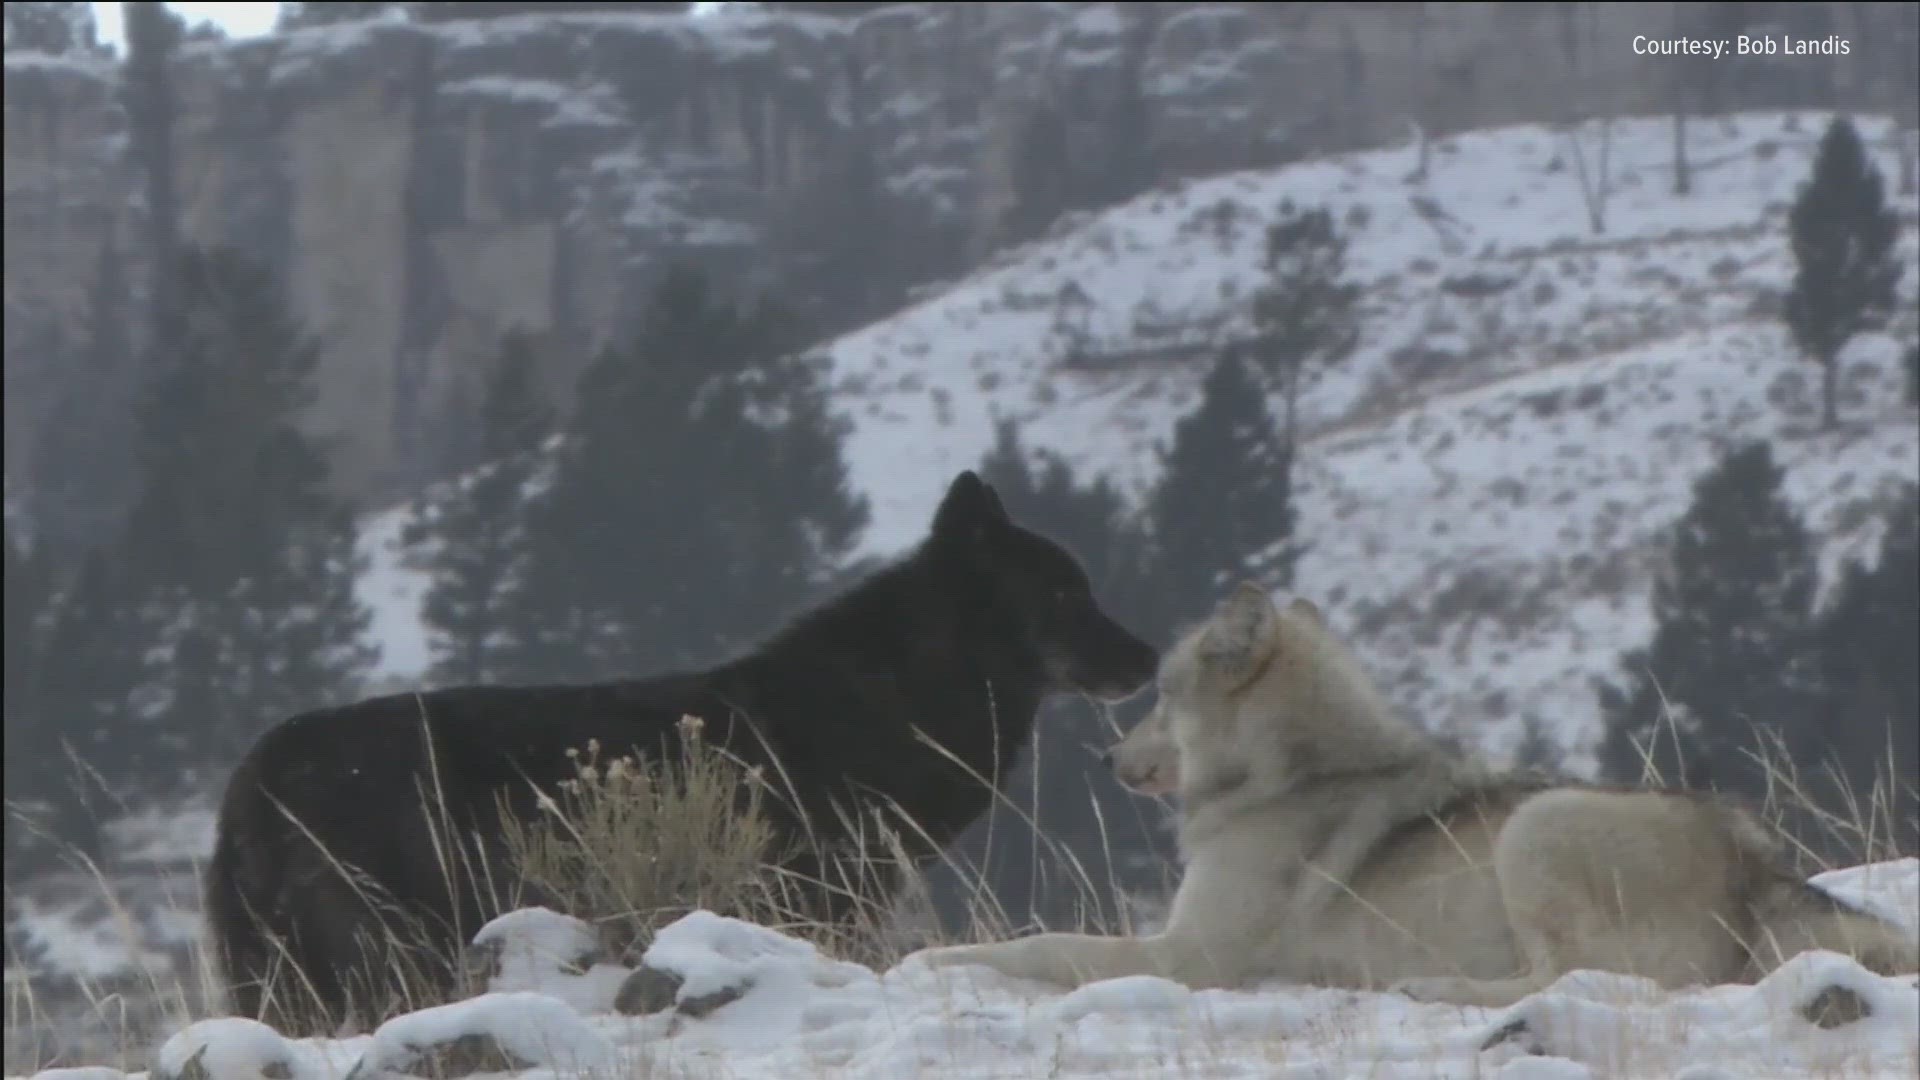 Conservation groups say Idaho, Wyoming and Montana are not properly managing their wolf populations, and the federal government should protect the species.